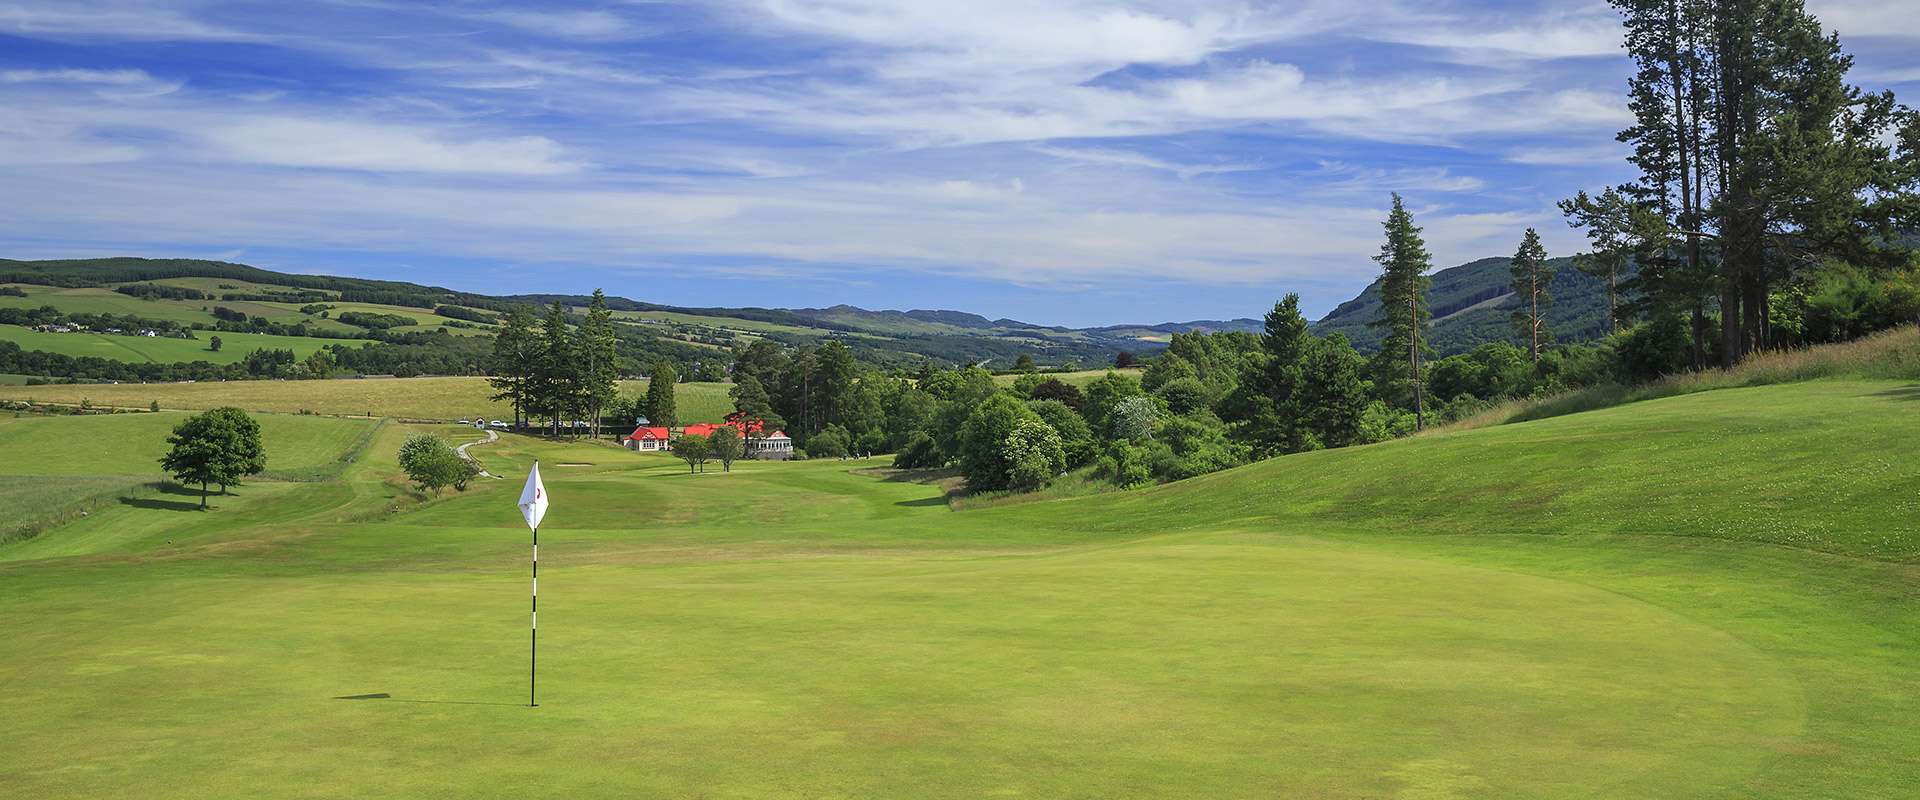 Pitlochry Golf Course Gallery Image 3